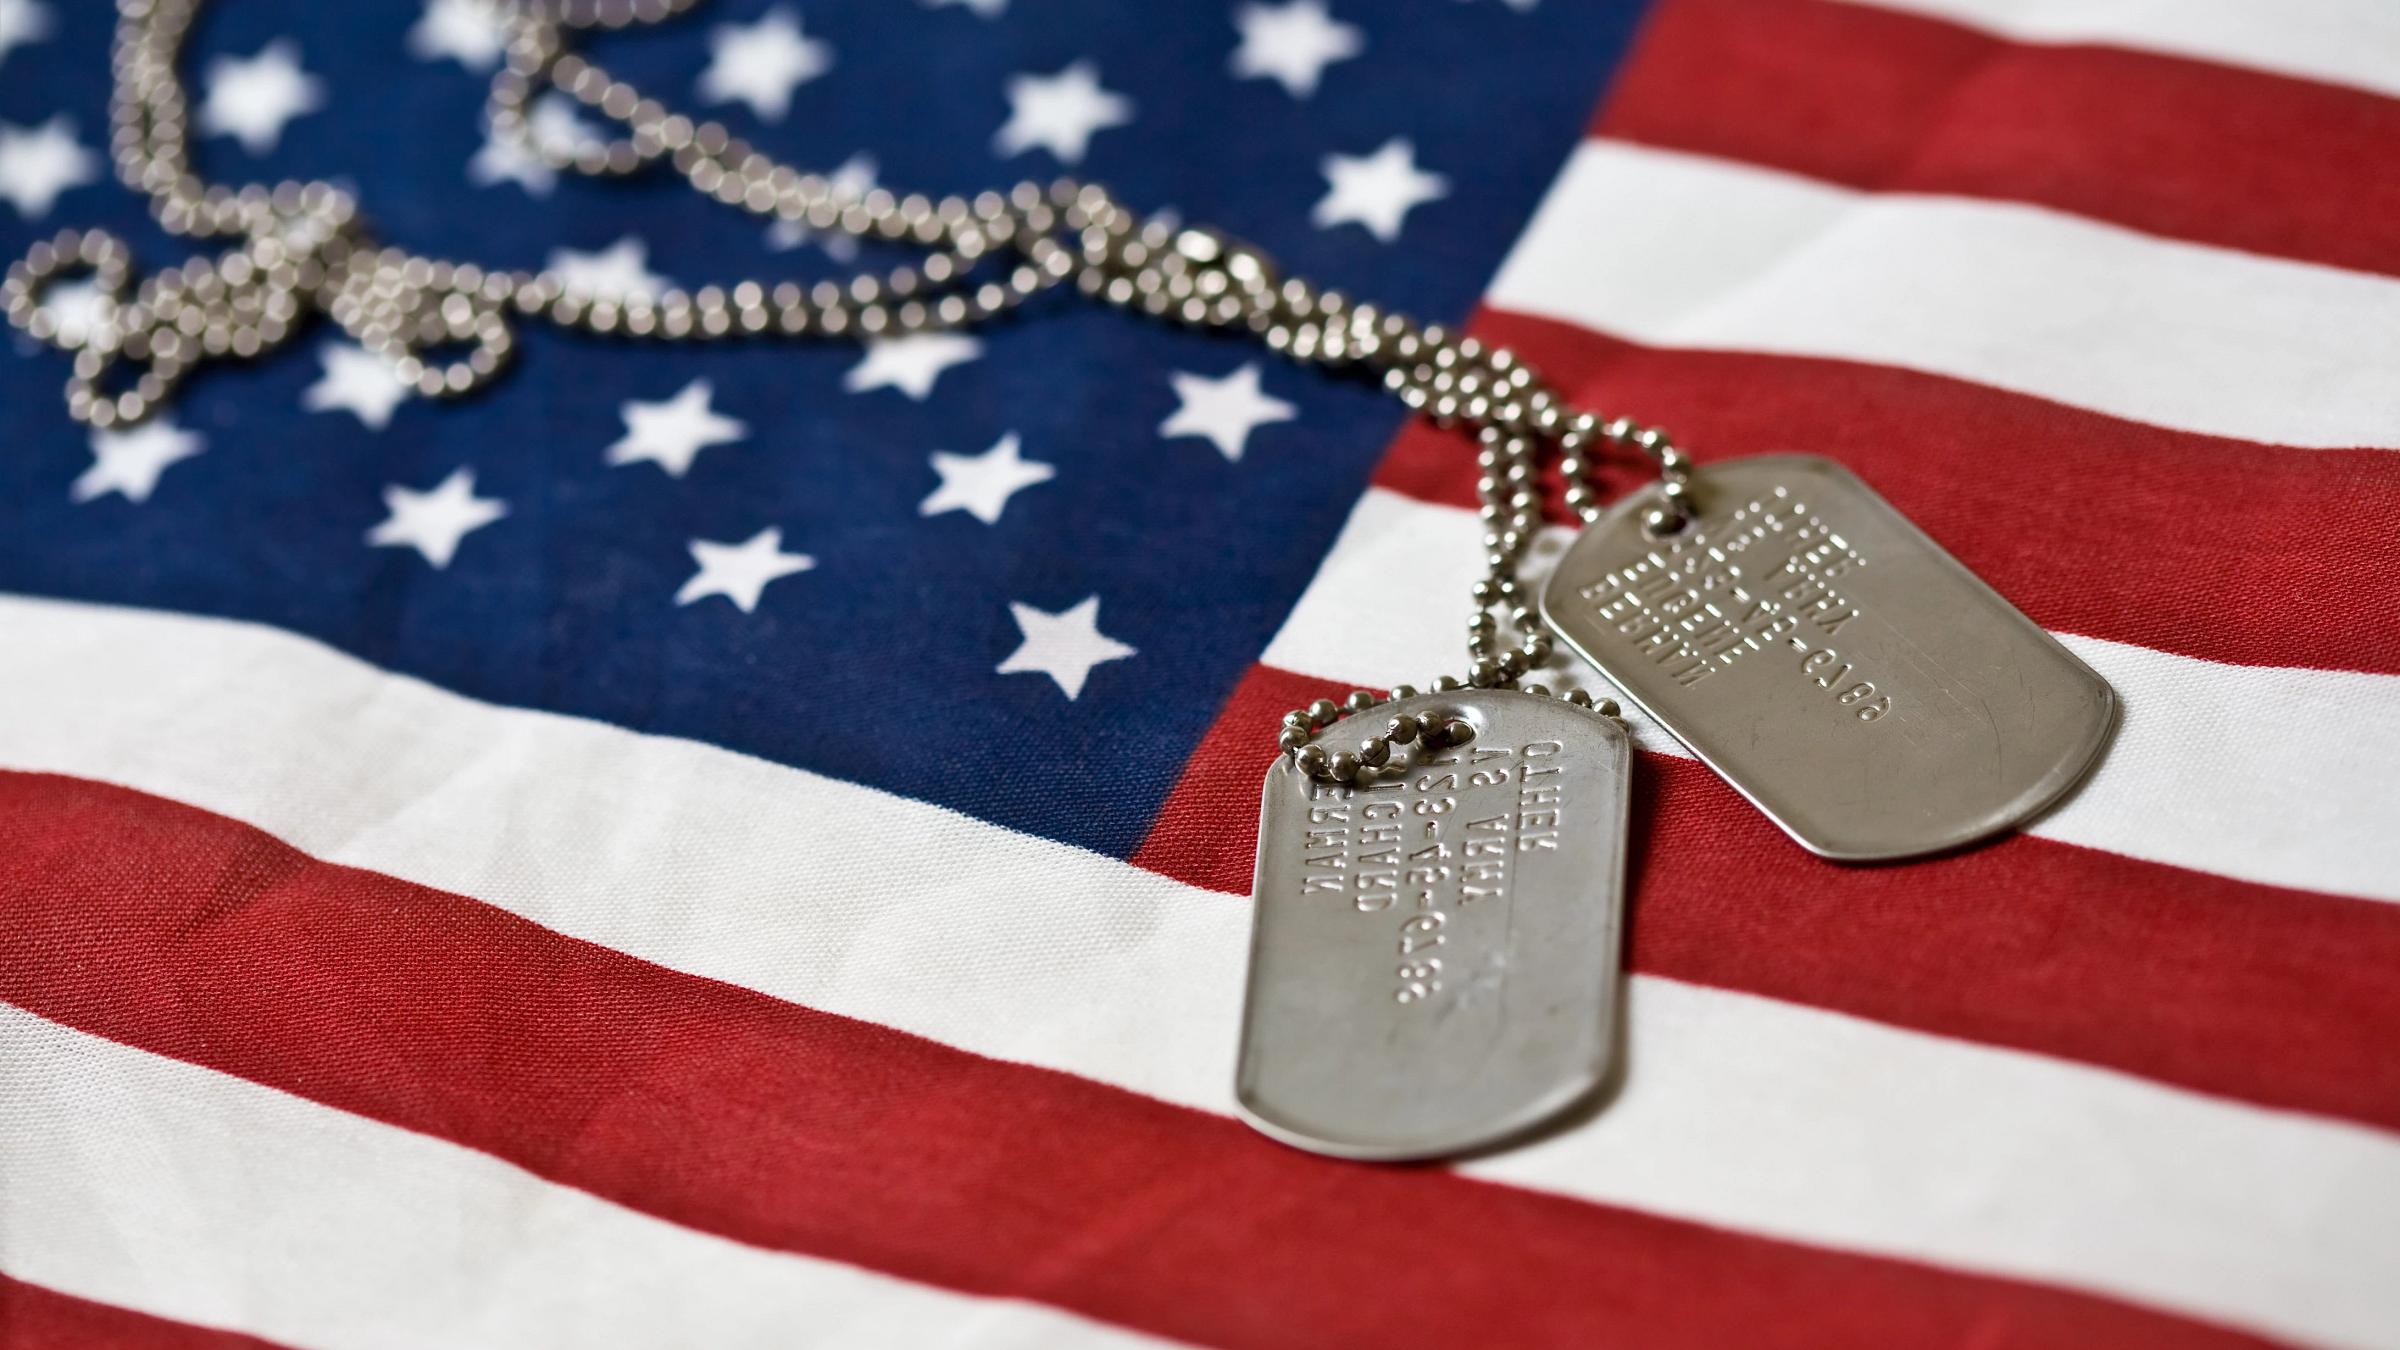 Pair of dog tags on american flag